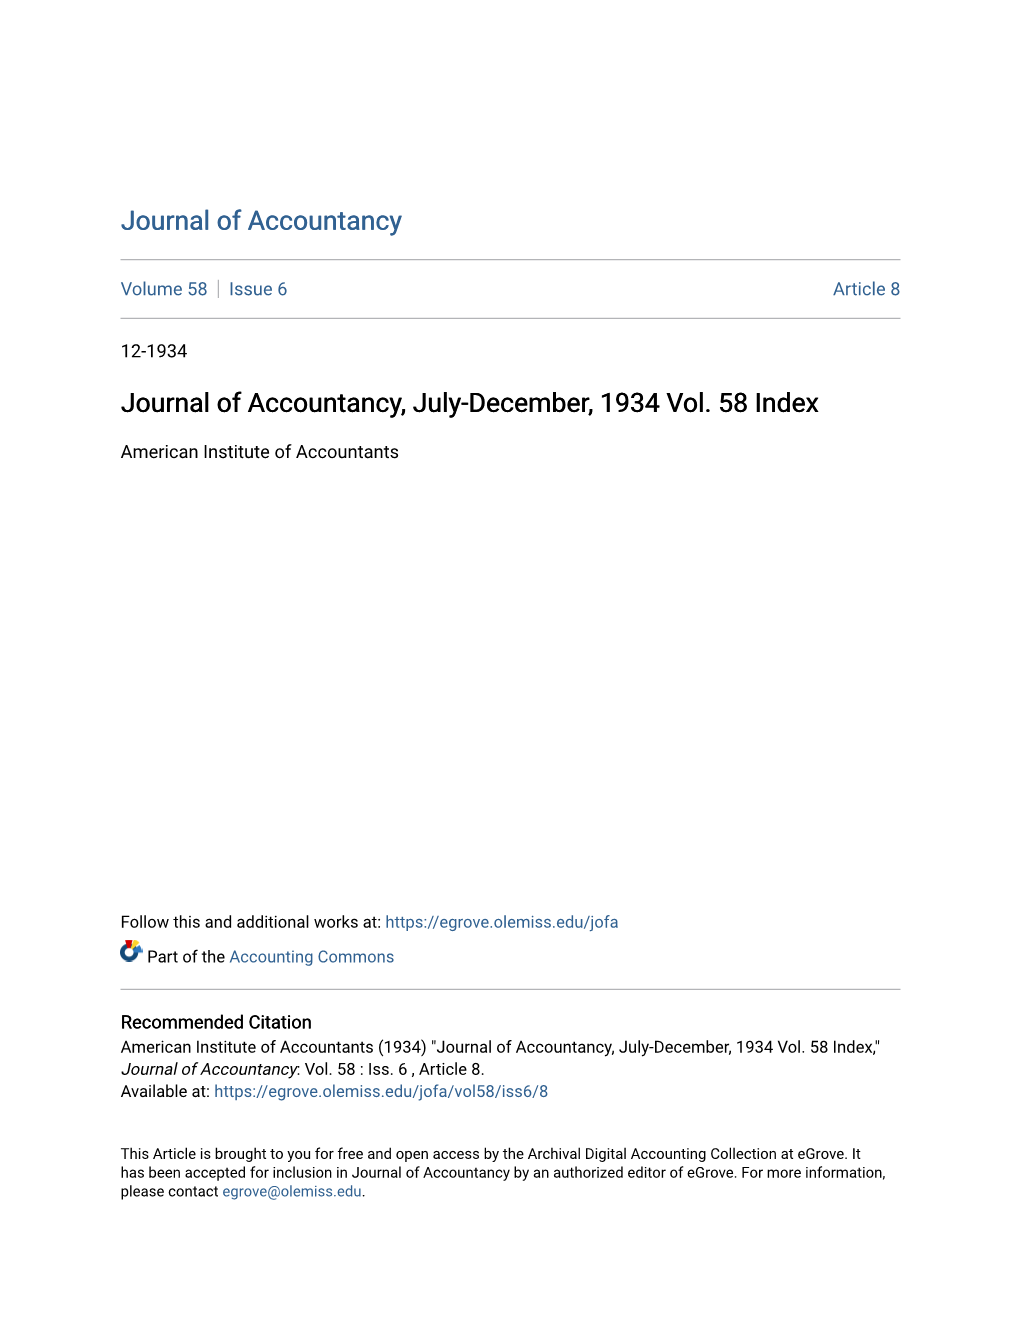 Journal of Accountancy, July-December, 1934 Vol. 58 Index